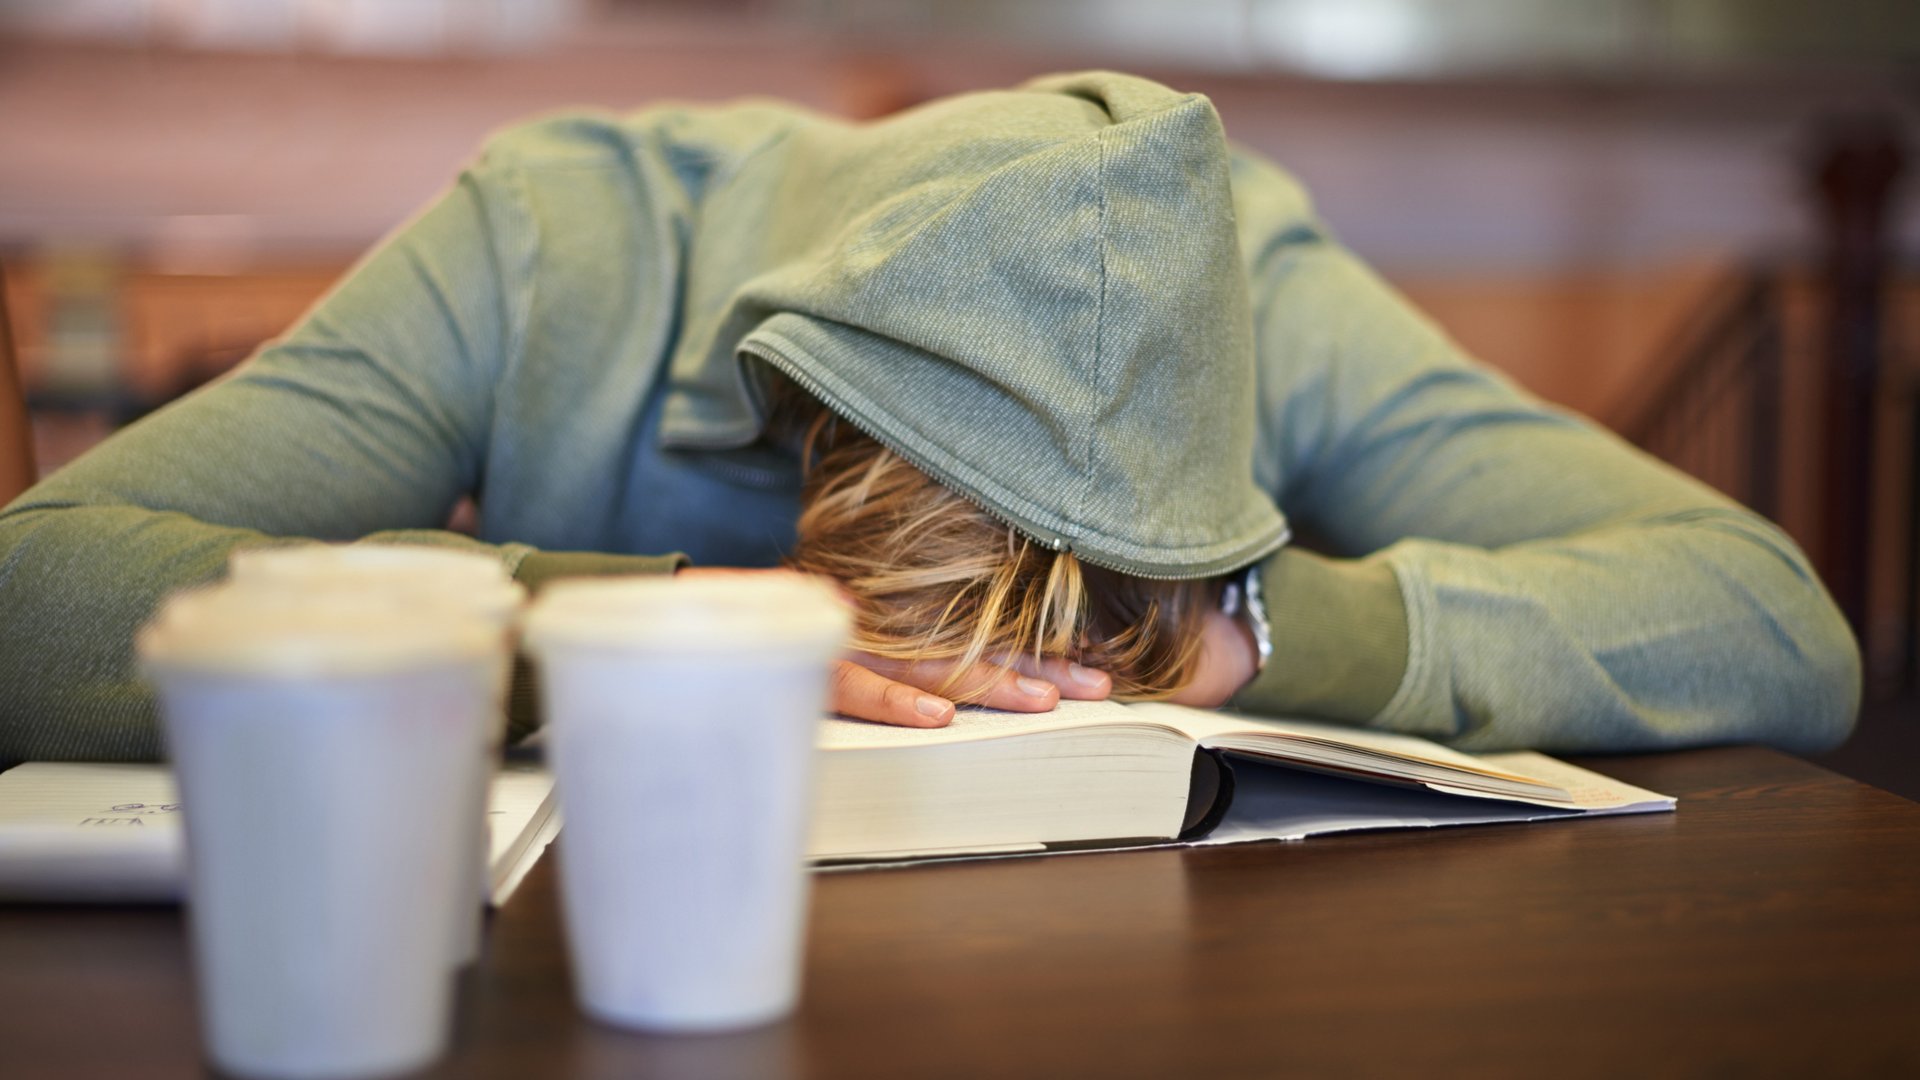 A student in a gray hoodie falls asleep in class